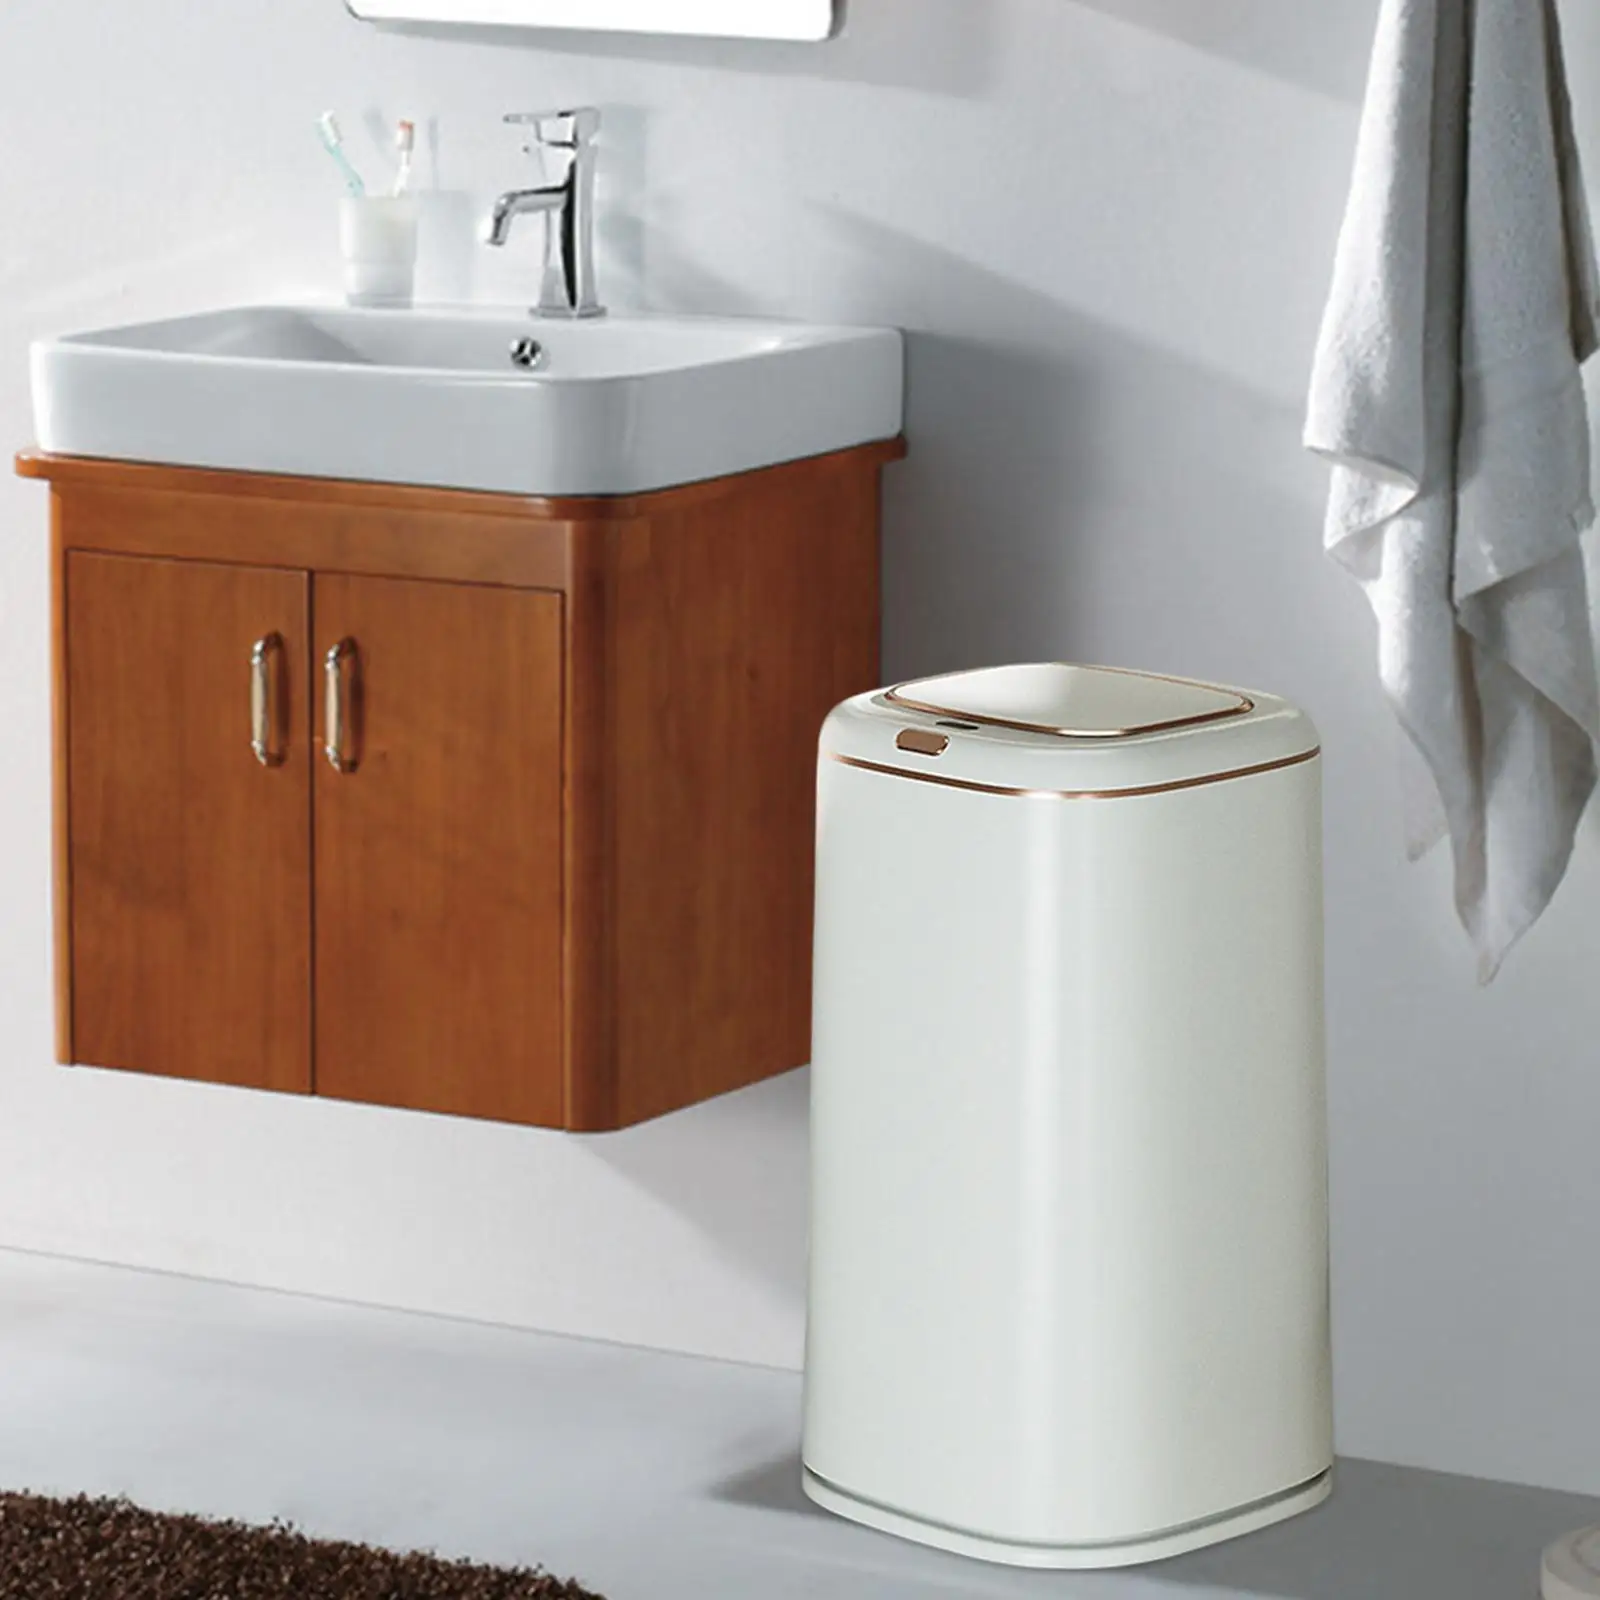 Automatic Garbage Can Bathroom Trash Can Dumpster High Capacity Dustbin Motion